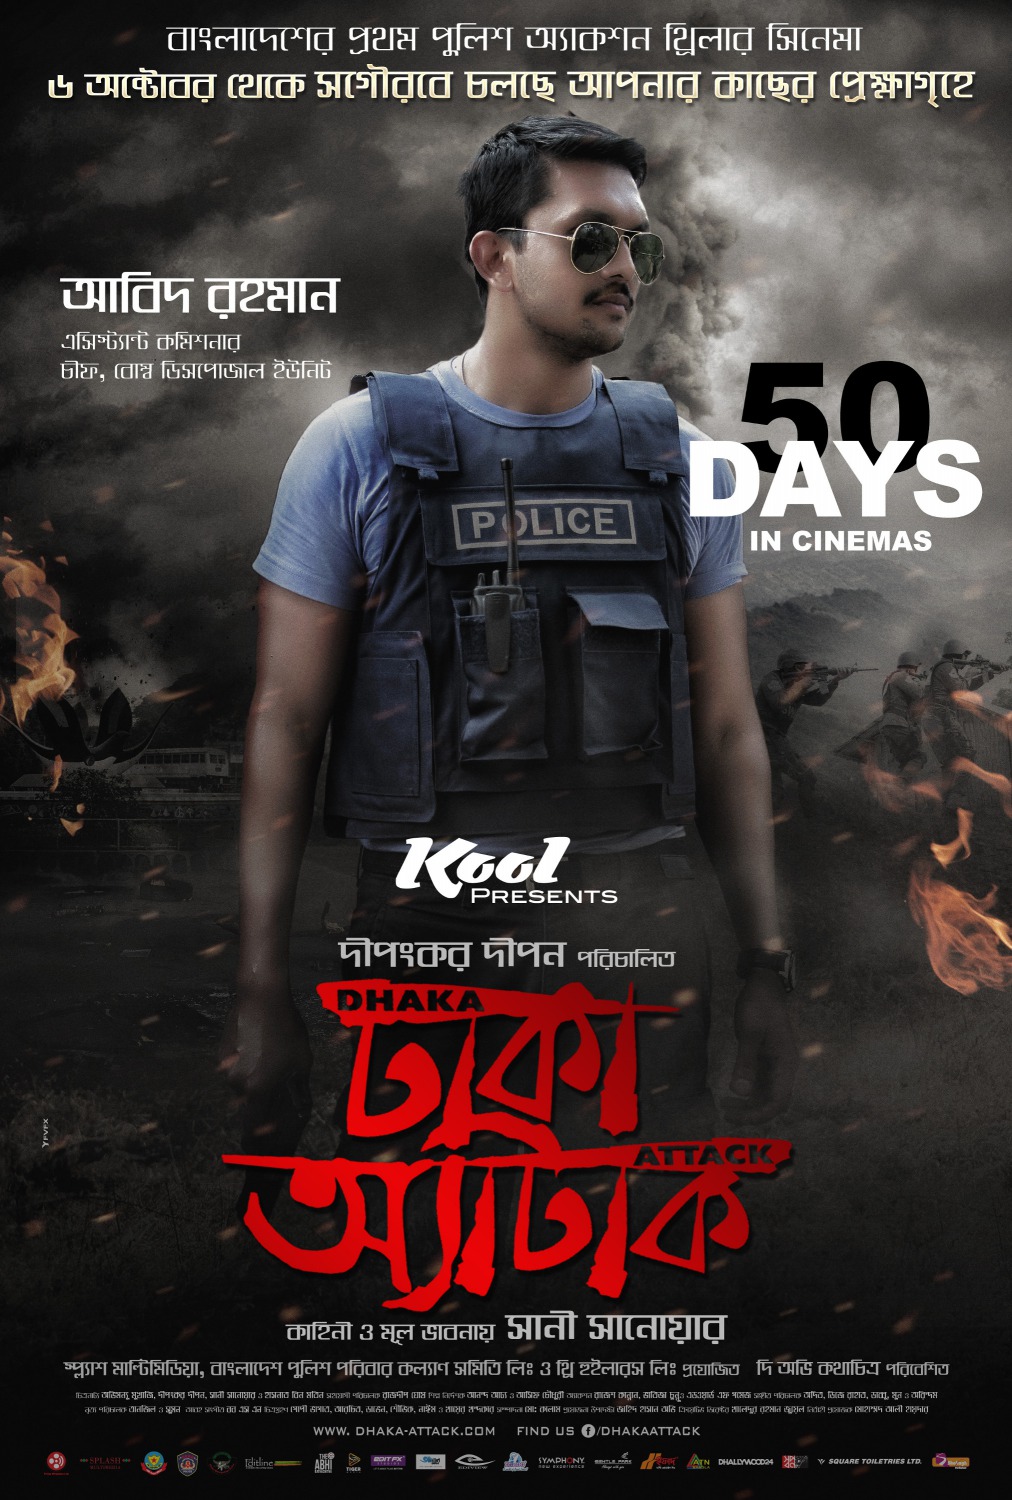 Extra Large Movie Poster Image for Dhaka Attack (#8 of 10)